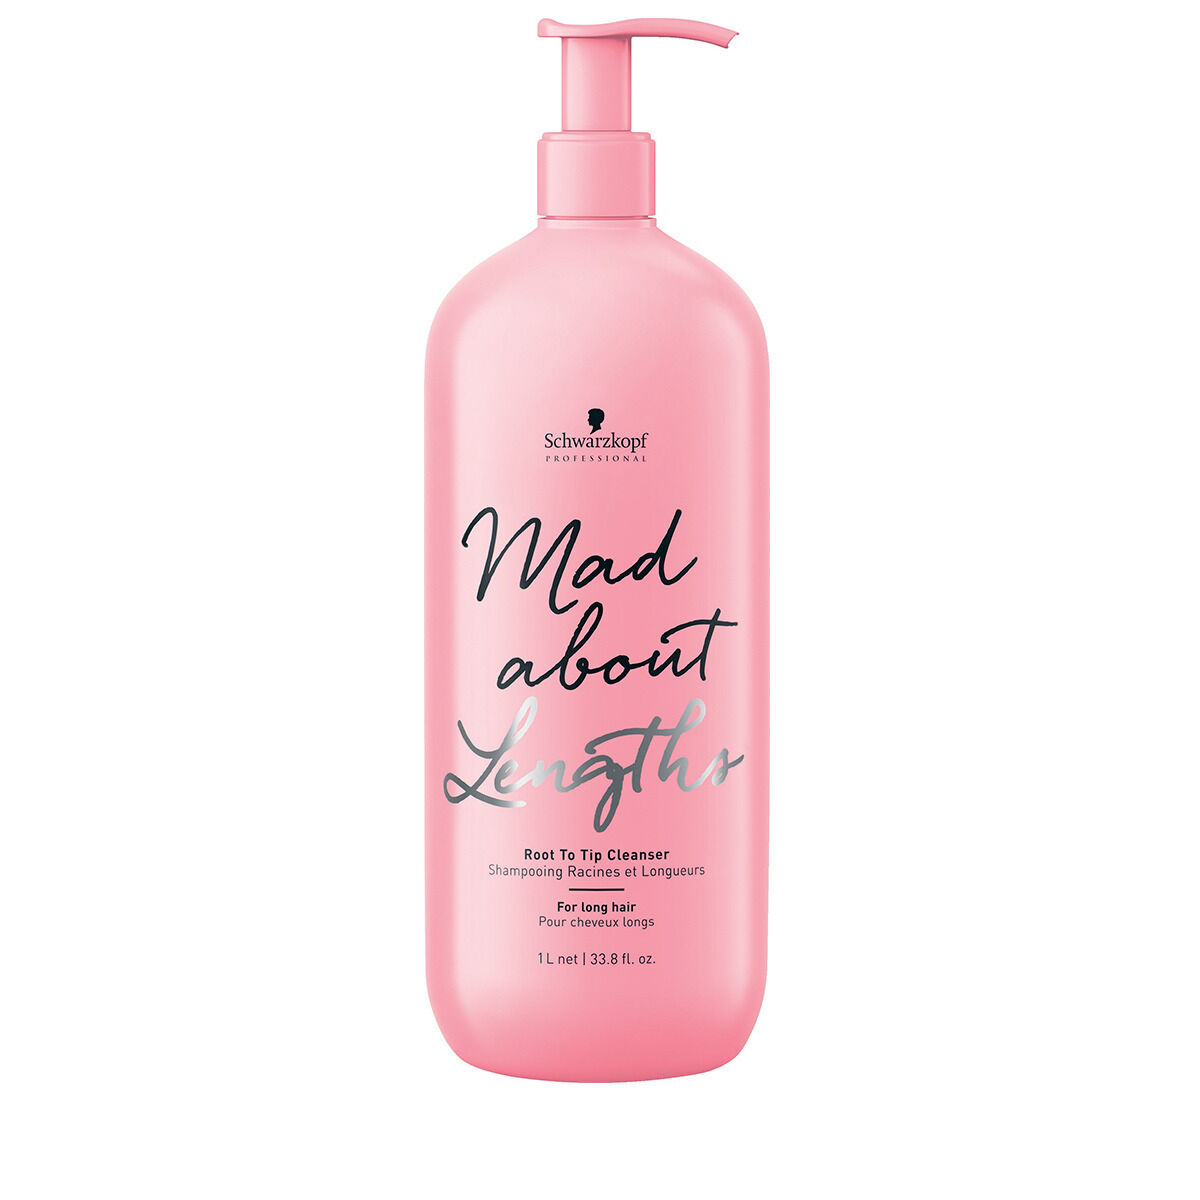 Schwarzkopf Professional Schwarzkopf Mad About Lengths Root To Tip Cleanser 1000 ml